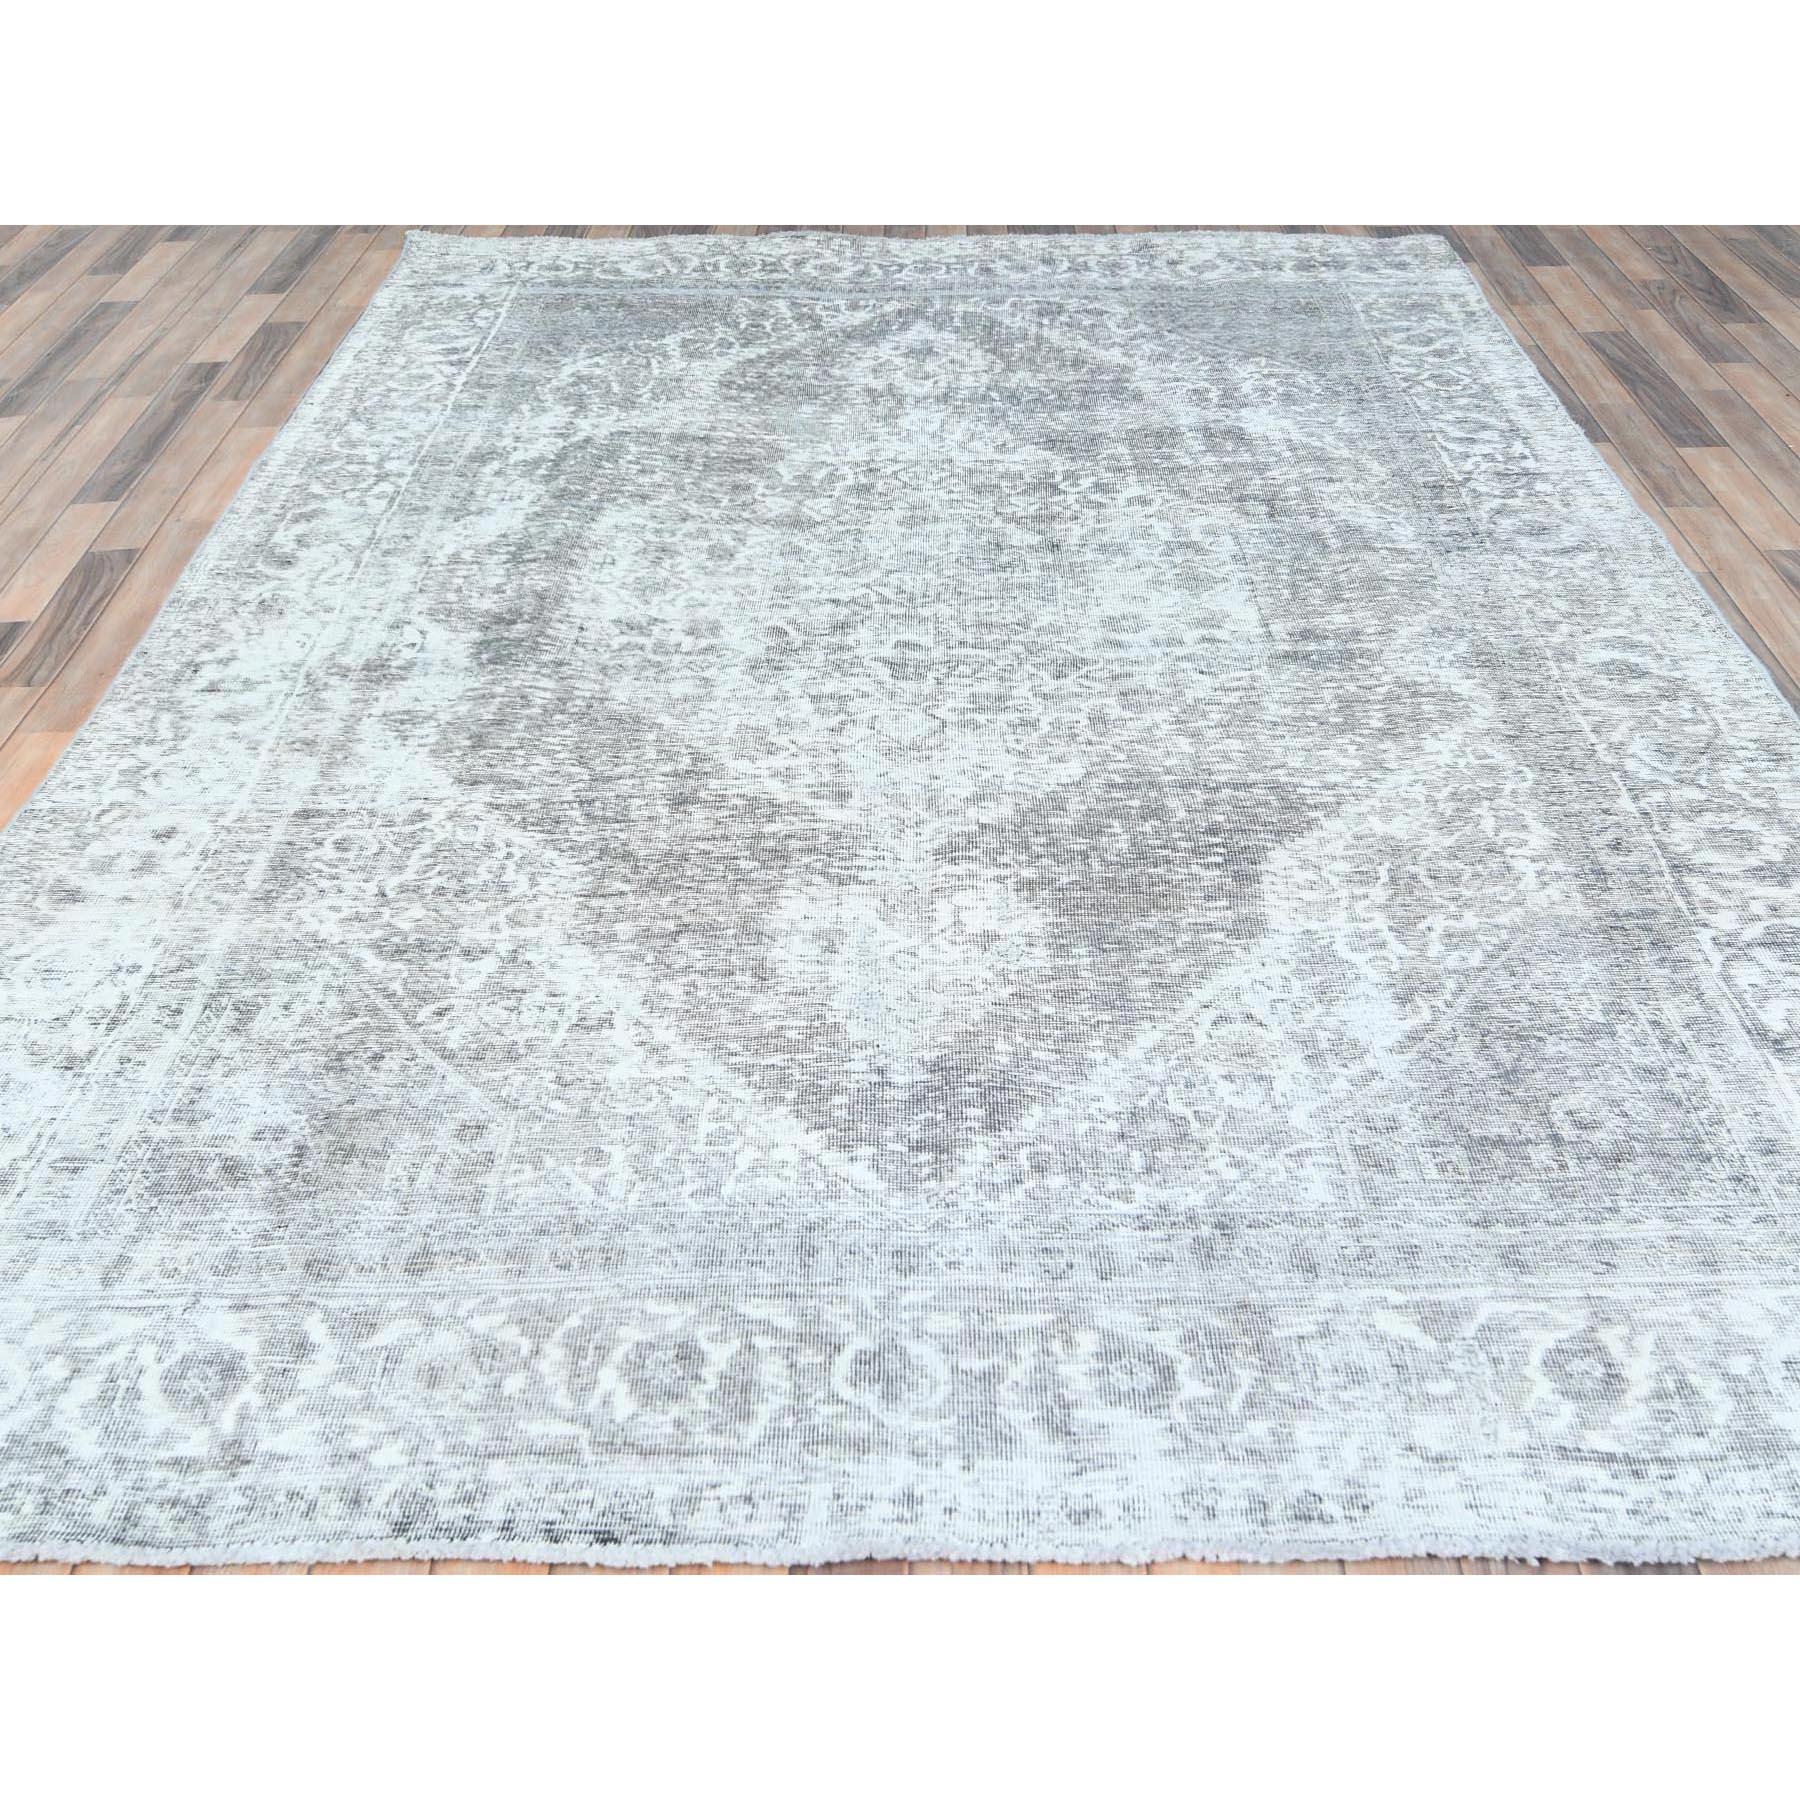 Medieval Light Grey Vintage Persian Tabriz Worn Down Rustic Feel Wool Hand Knotted Rug For Sale